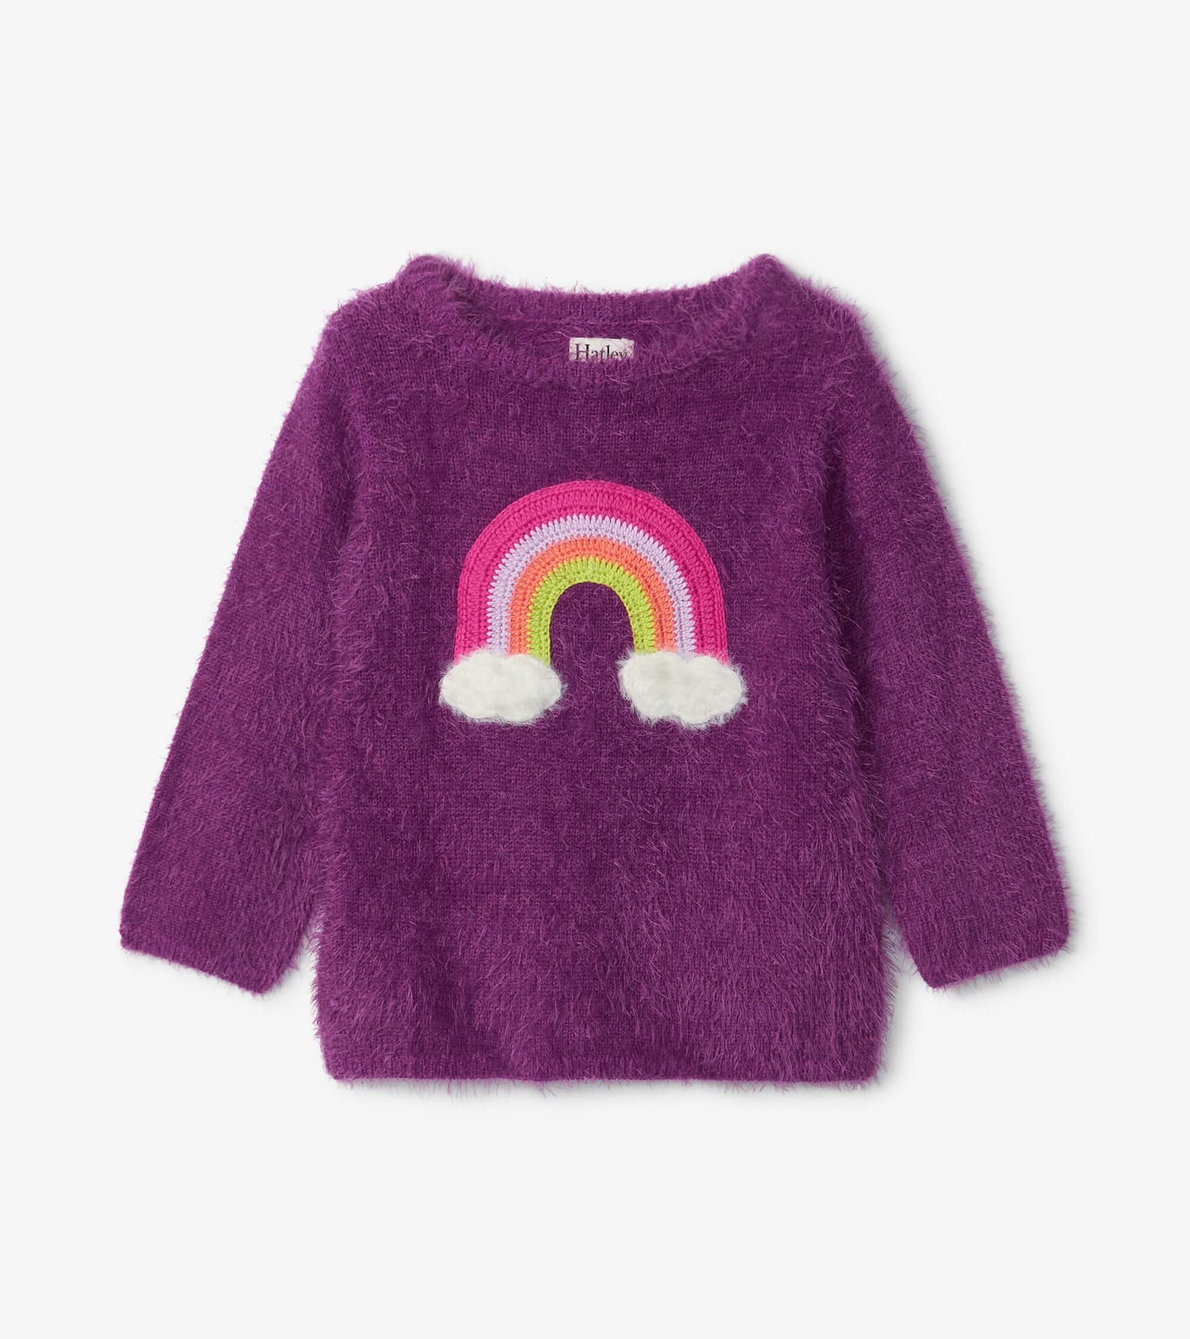 View larger image of Girls Rainbow Cloud Fuzzy Sweater